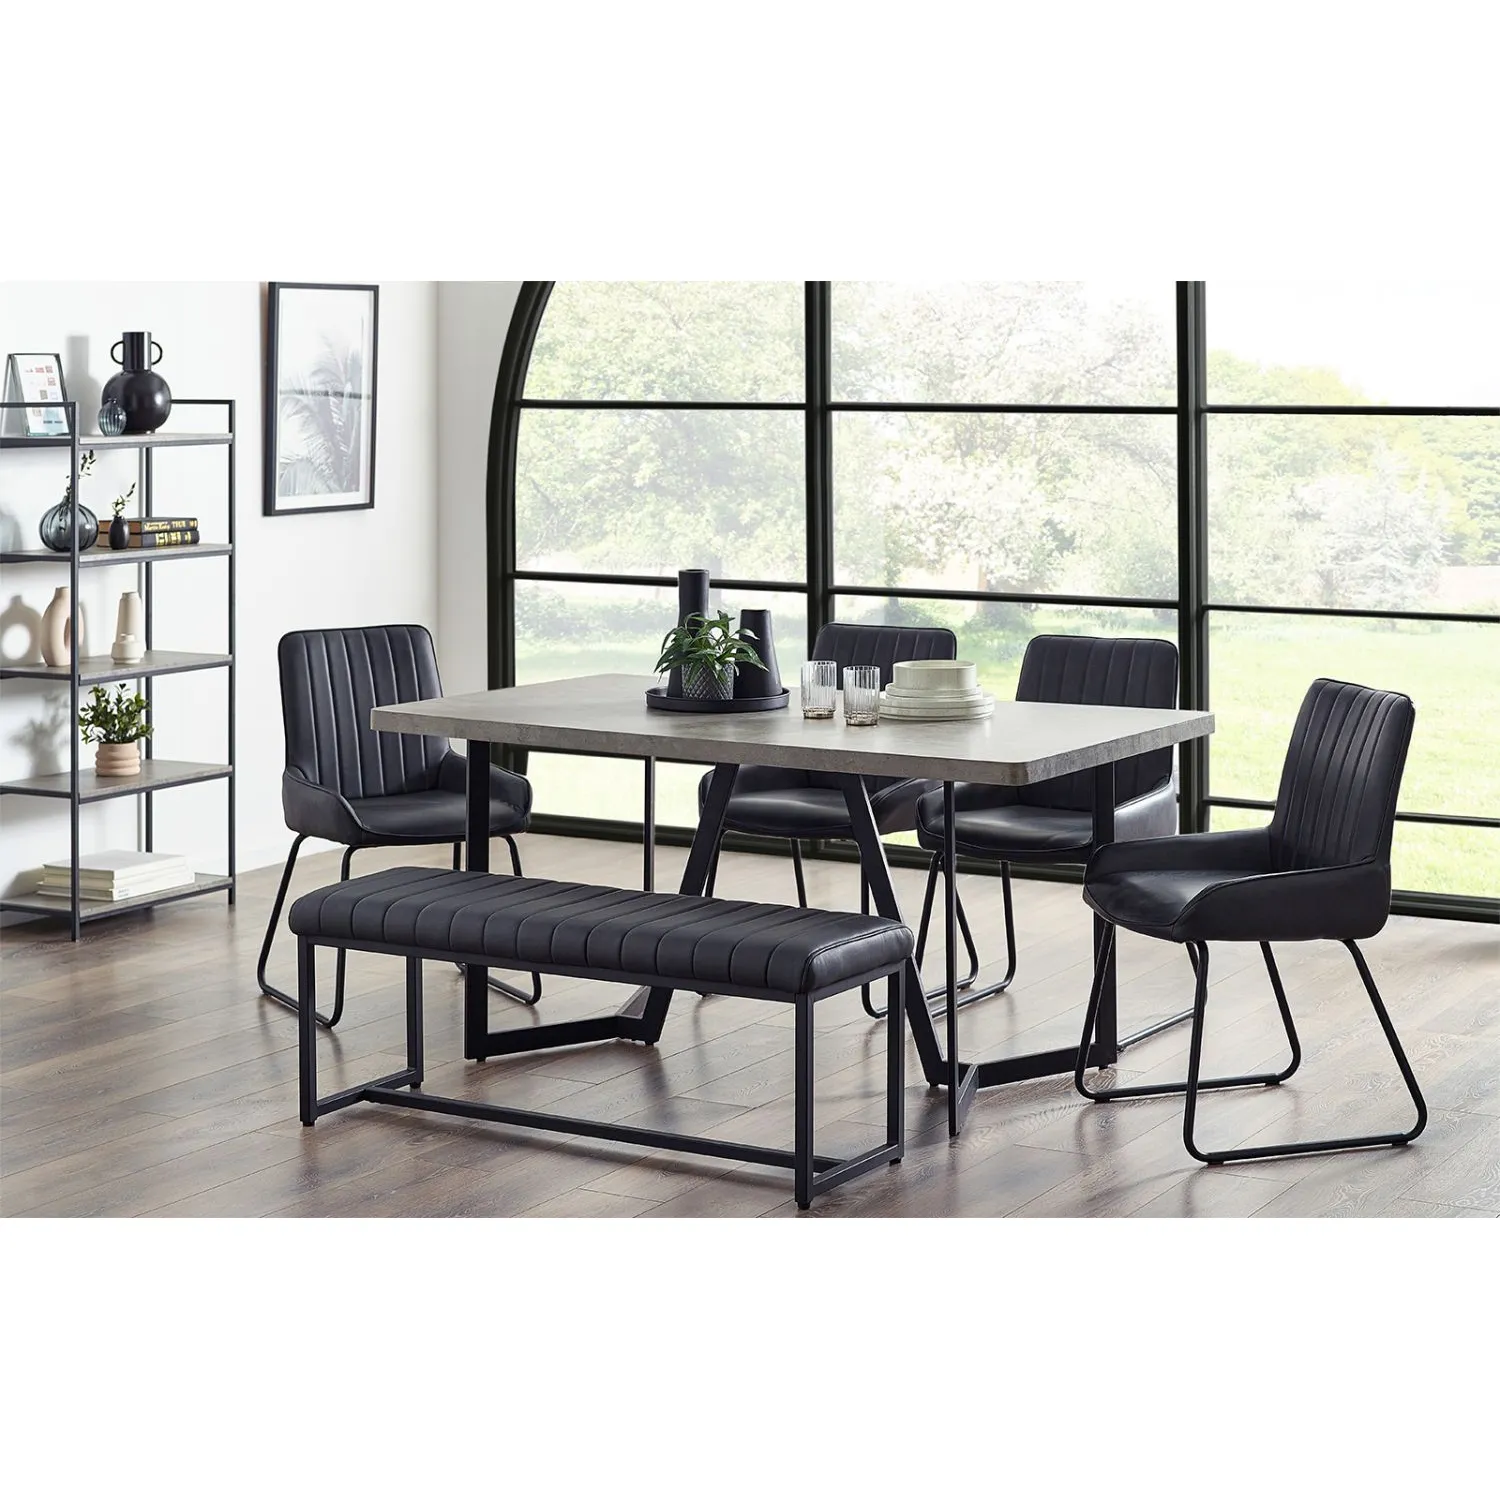 Miller Concrete Effect Dining Table